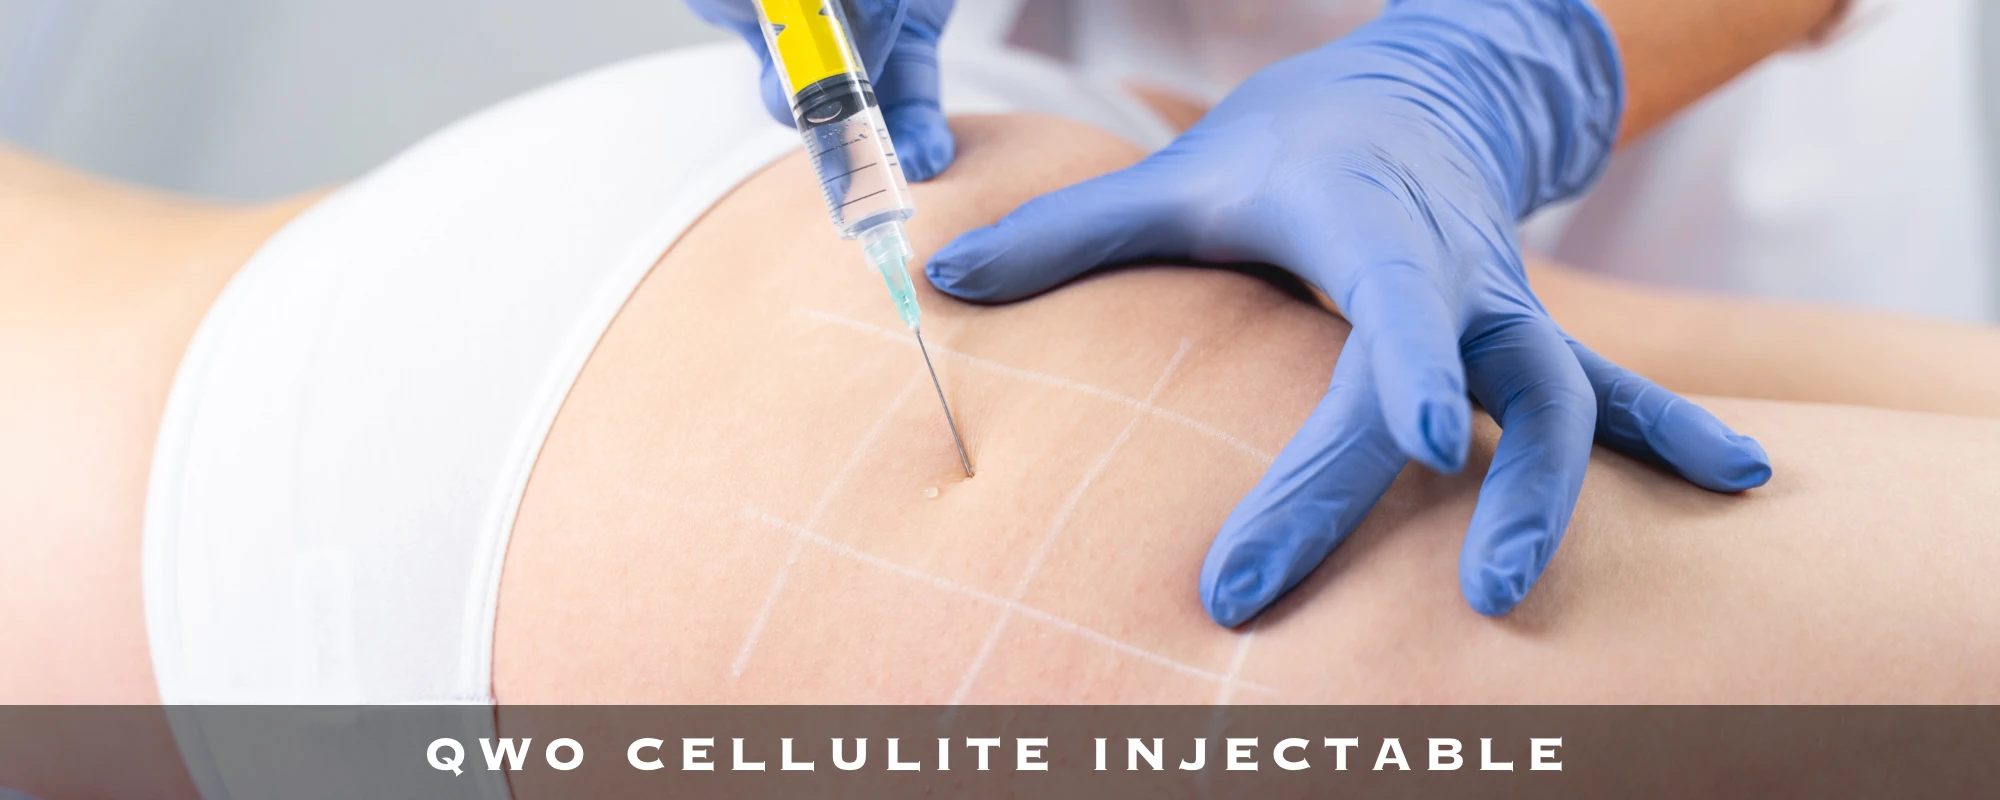 QWO CELLULITE INJECTABLE